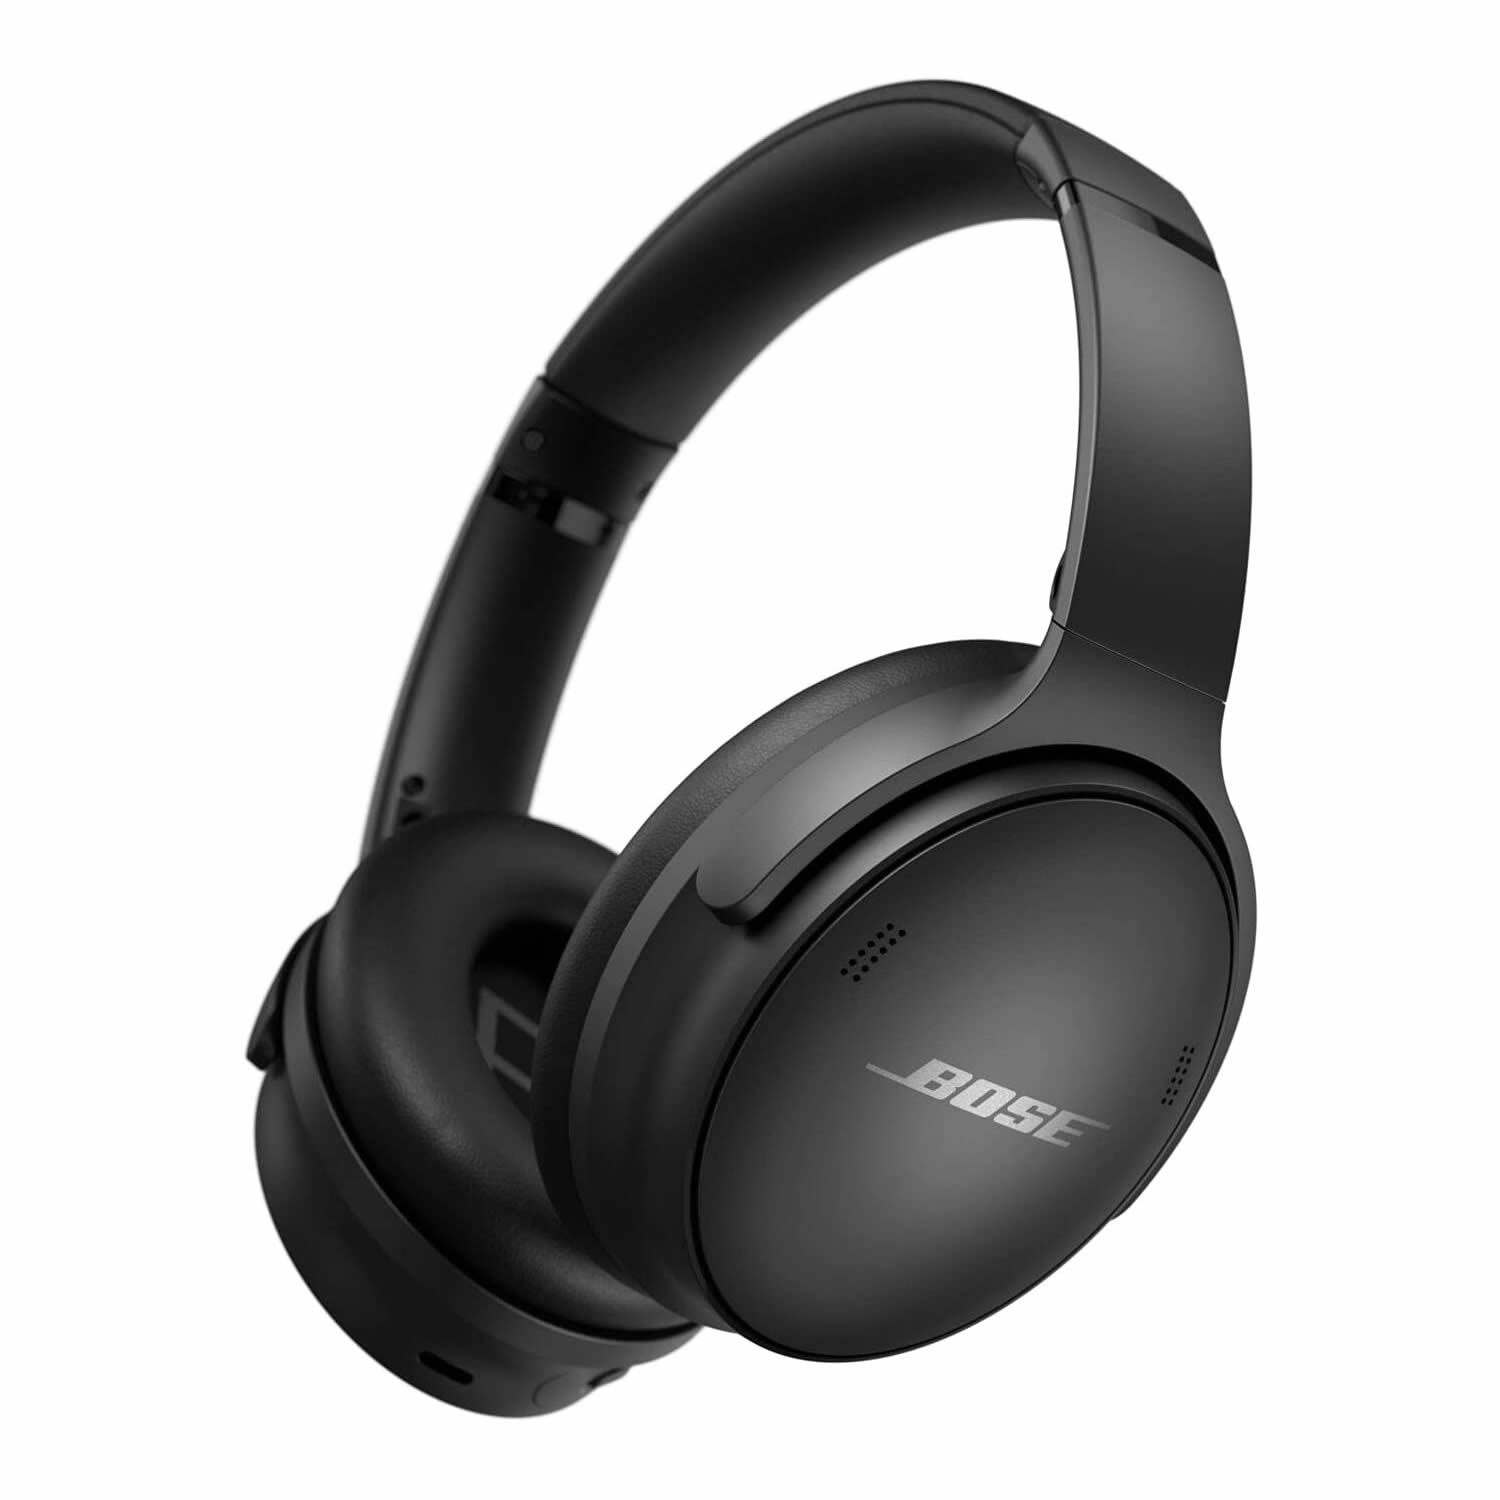 Are the Bose QC45 Headphones Better Than AirPods Max? - Mark Ellis Reviews